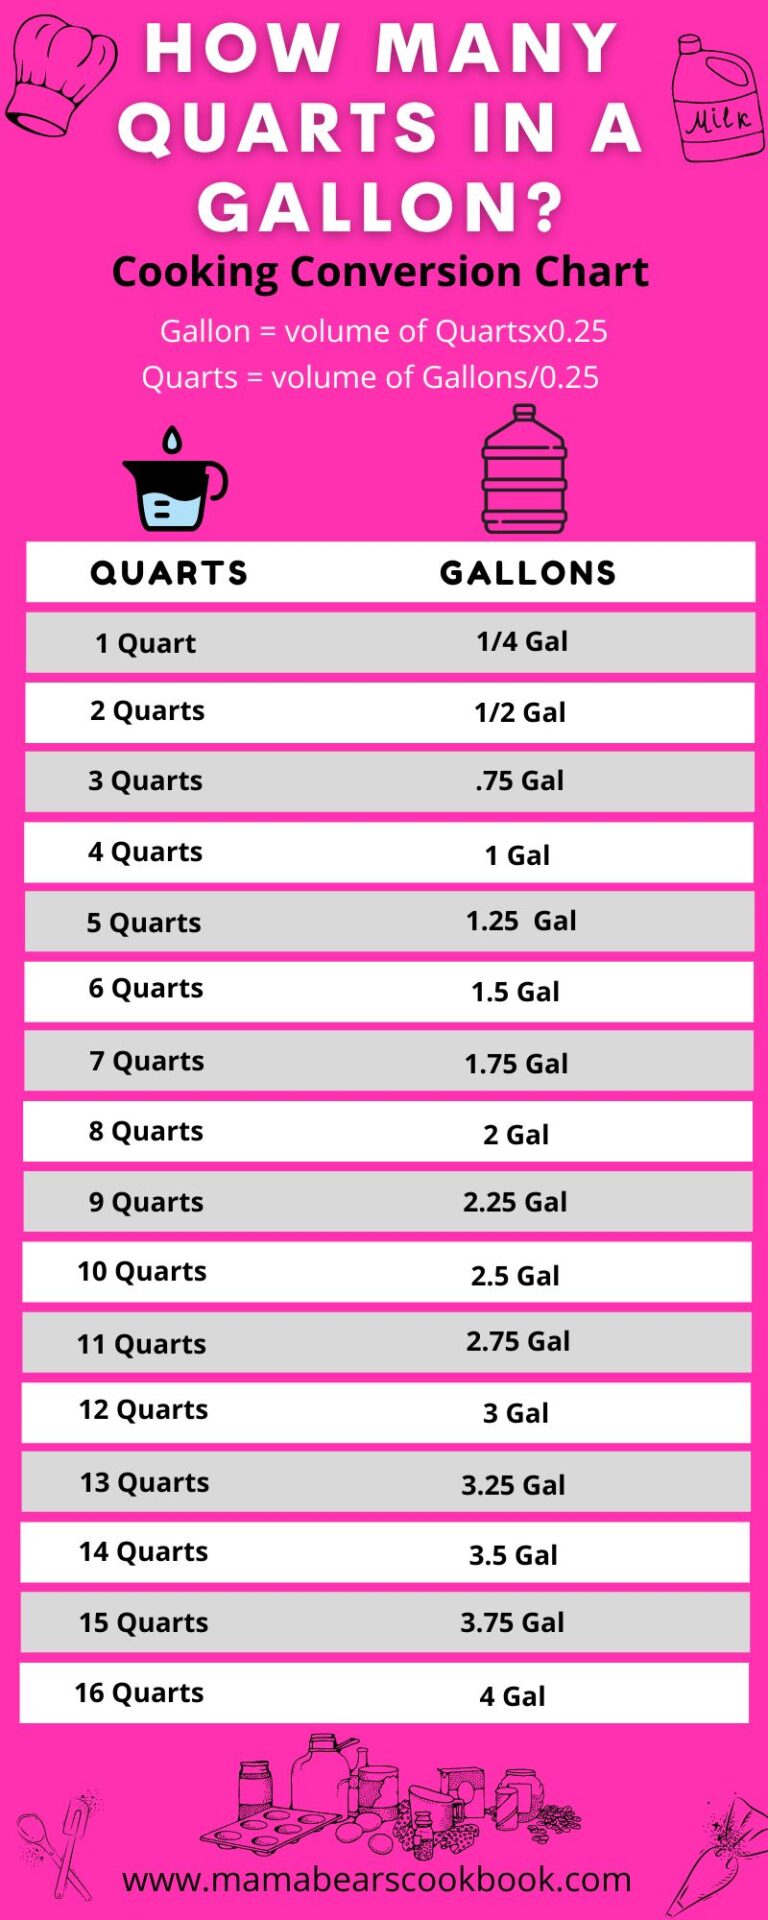 How Many Quarts In A Gallon? | Family Friendly Low Carb Meals